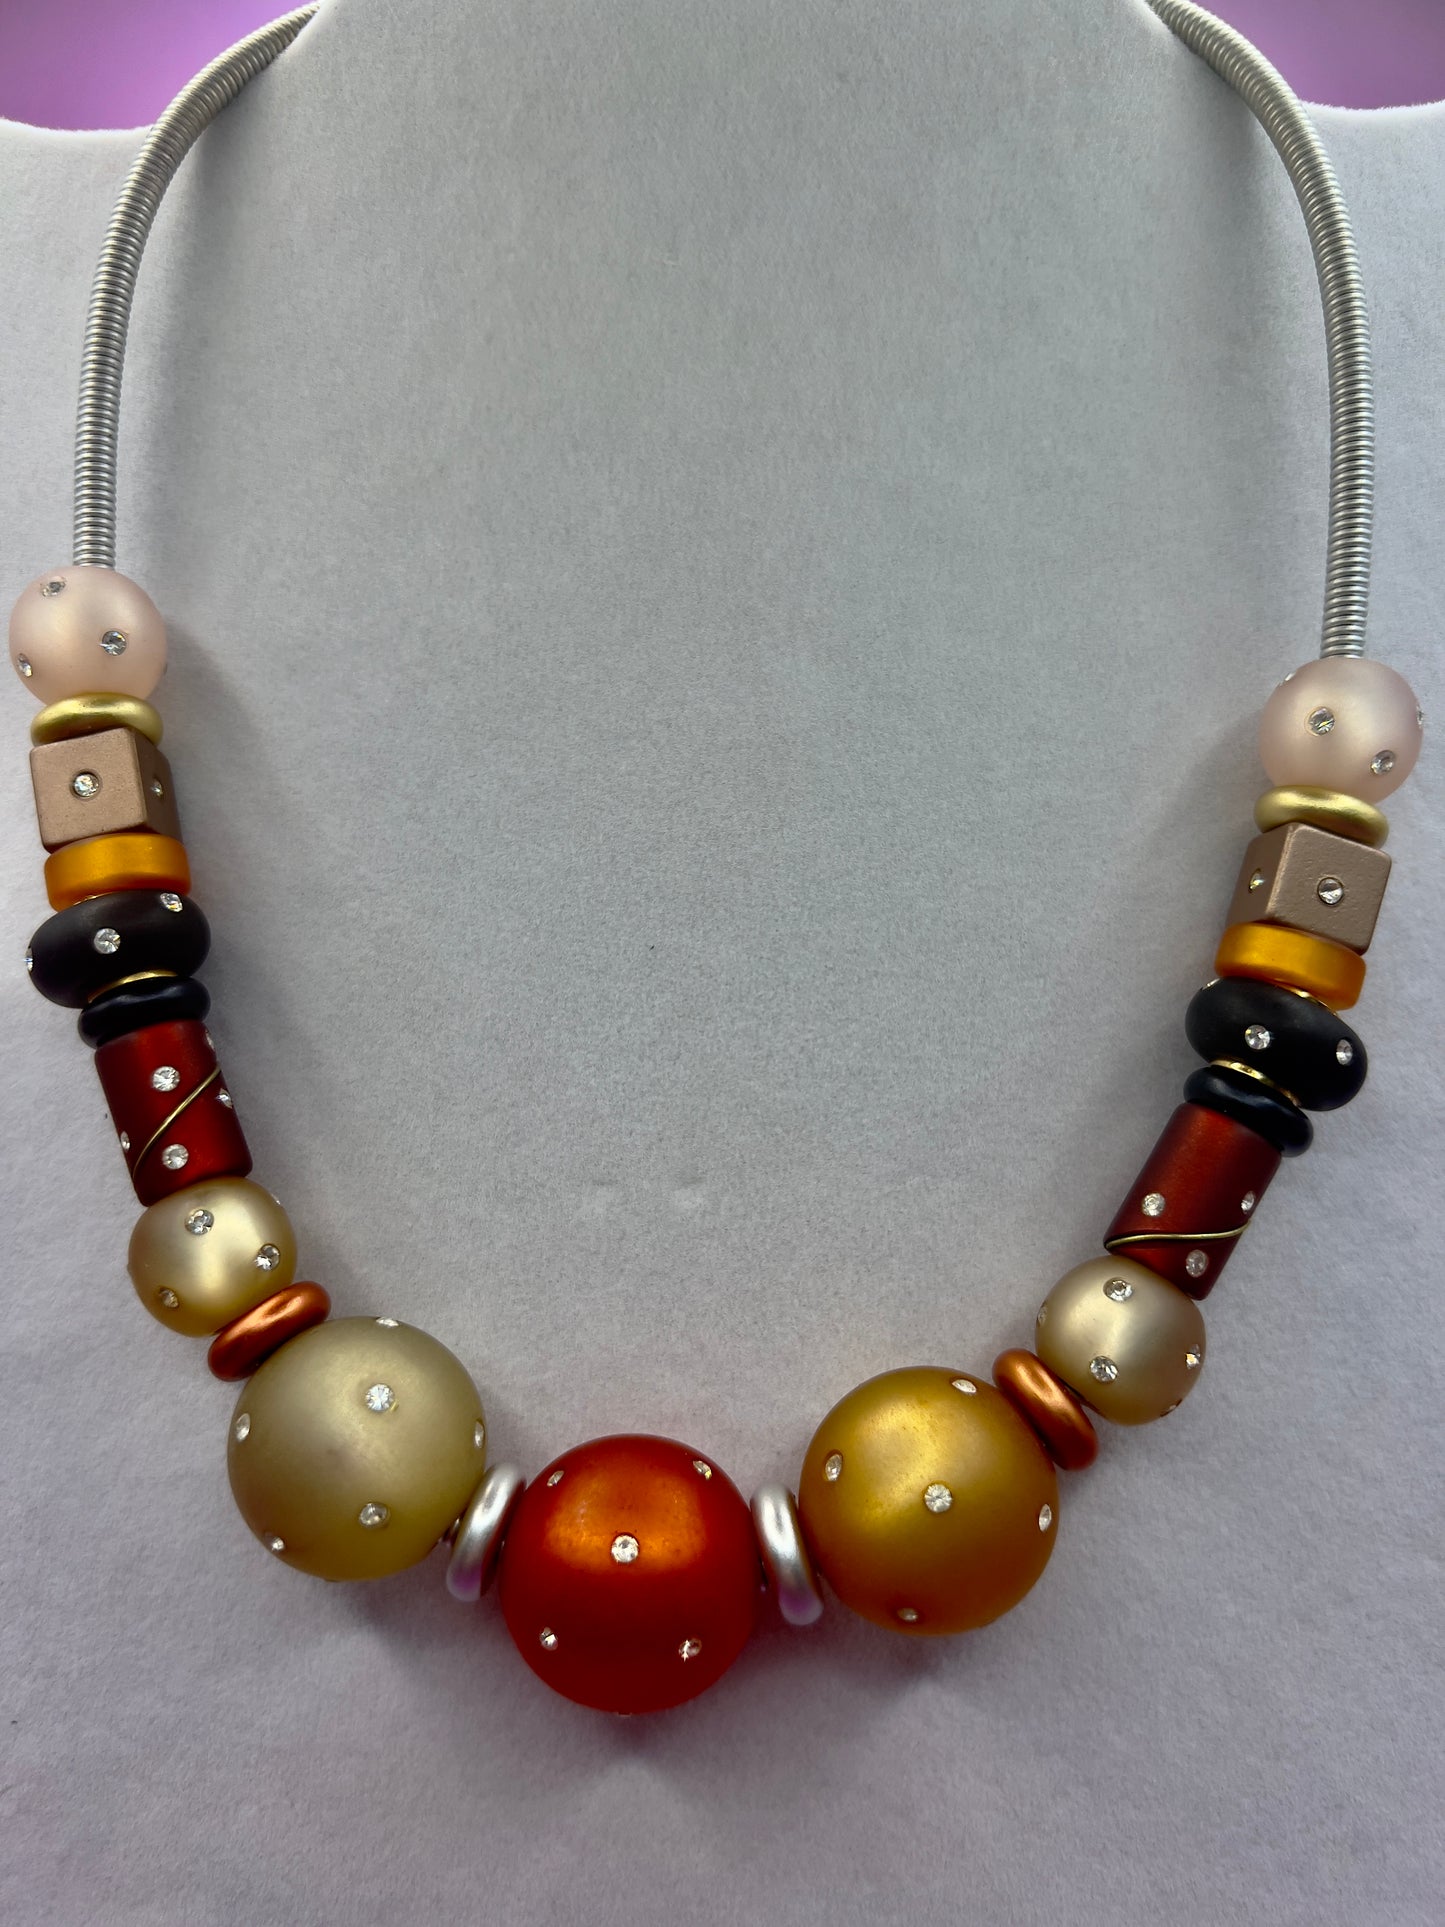 Vintage Necklace with Matte Acrylic Beads and Rhinestones